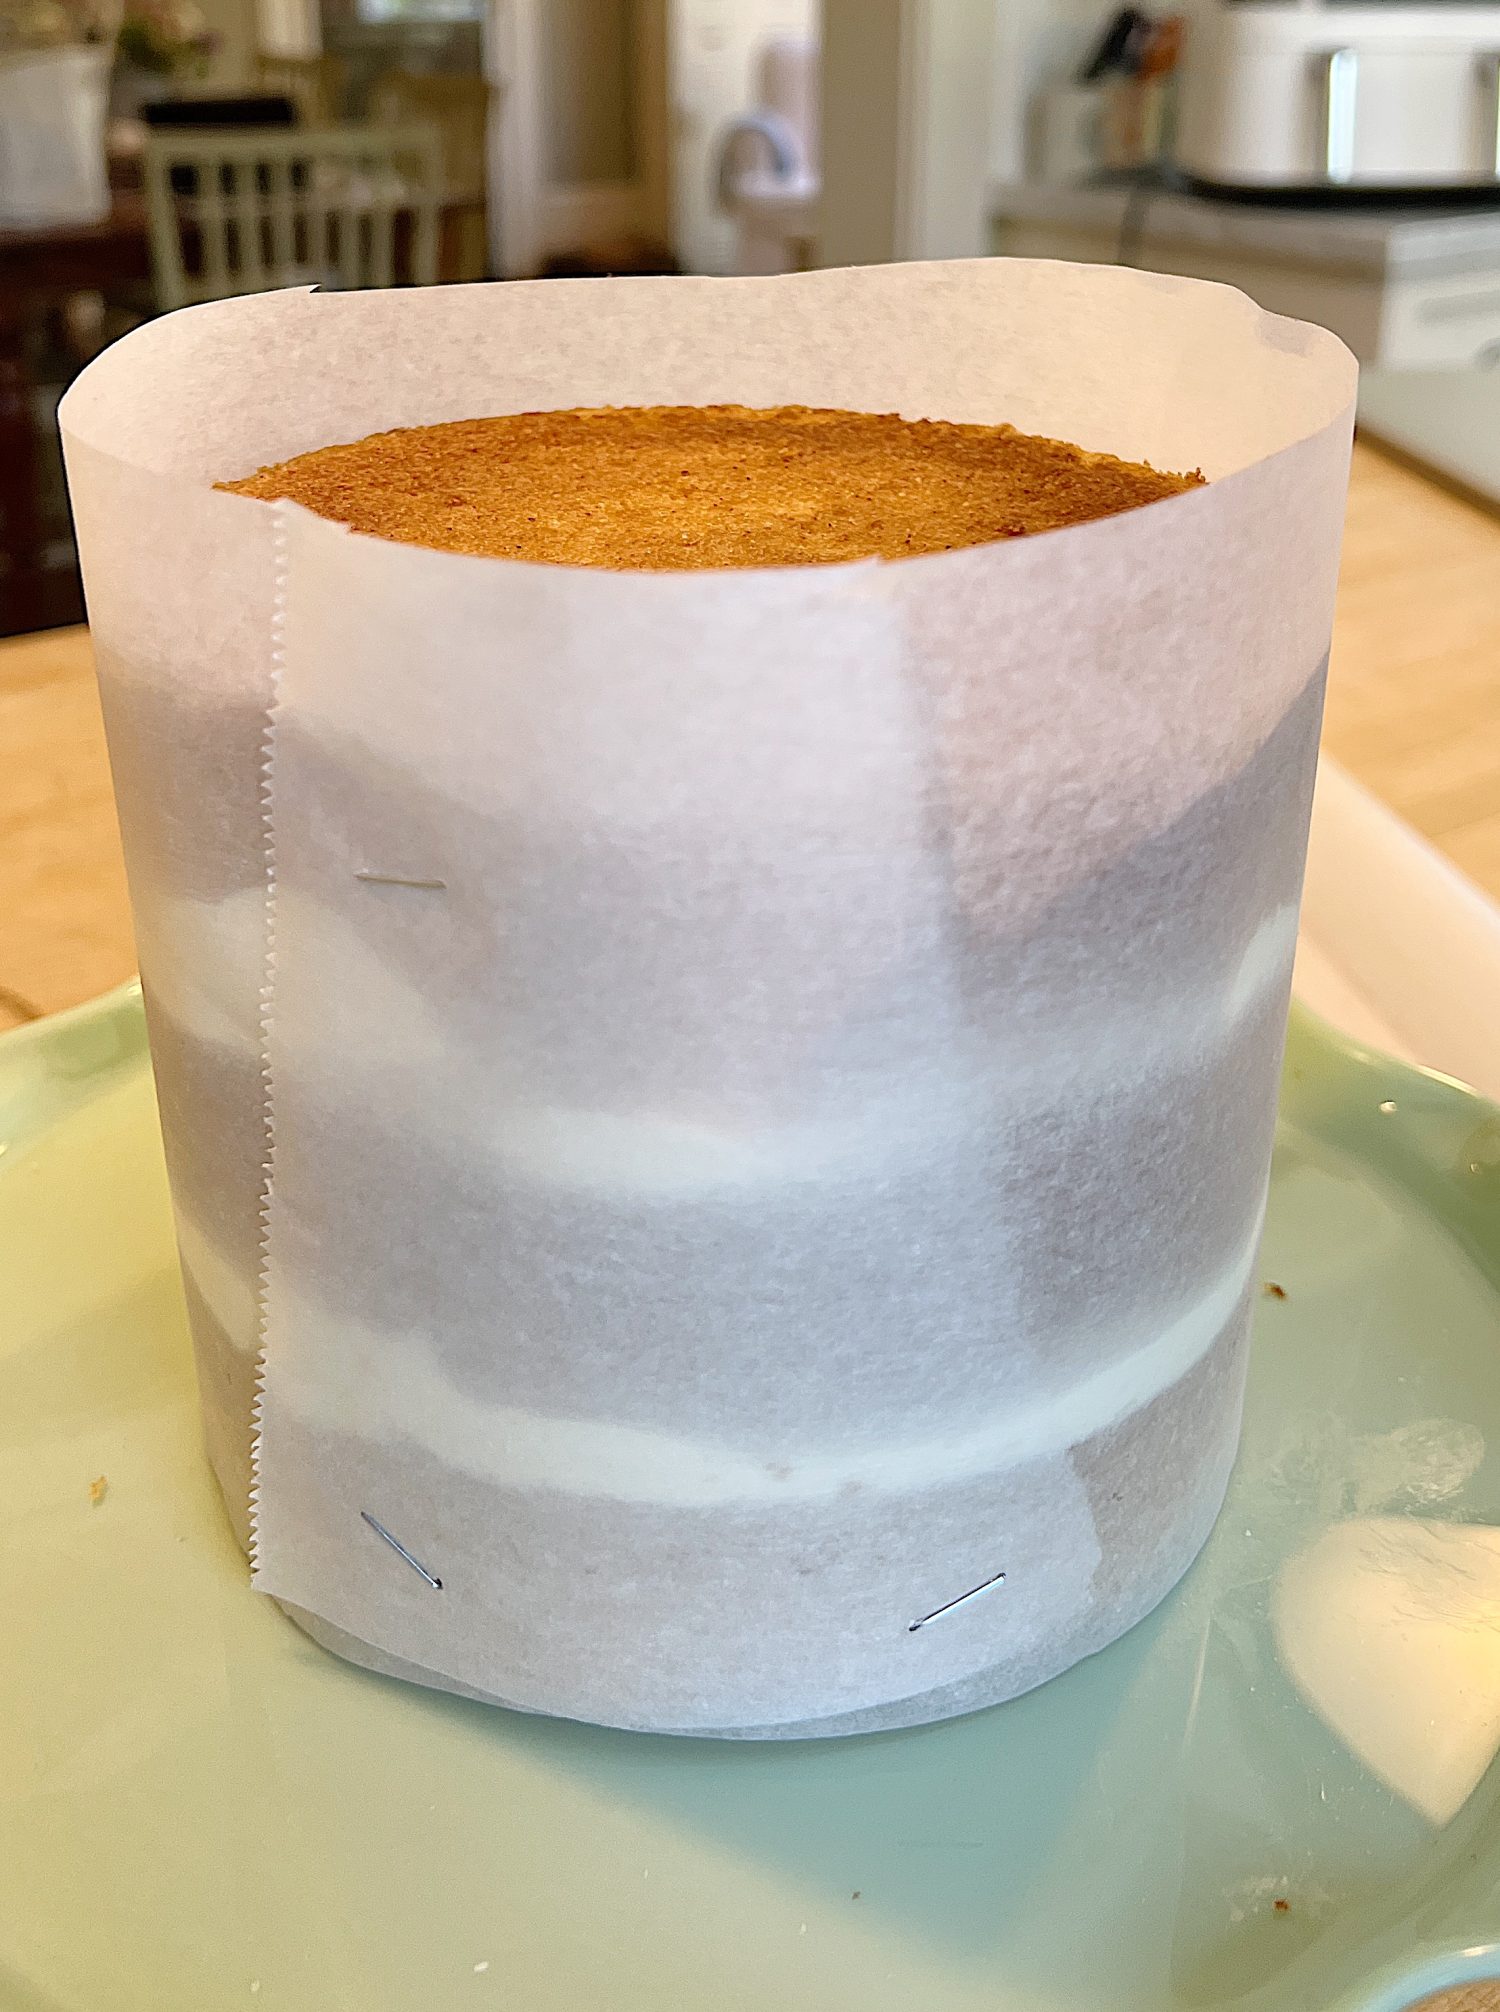 https://my100yearoldhome.com/wp-content/uploads/2022/05/How-to-Frost-a-Cake-with-Edible-Paper-Pastry-Sheets.jpg